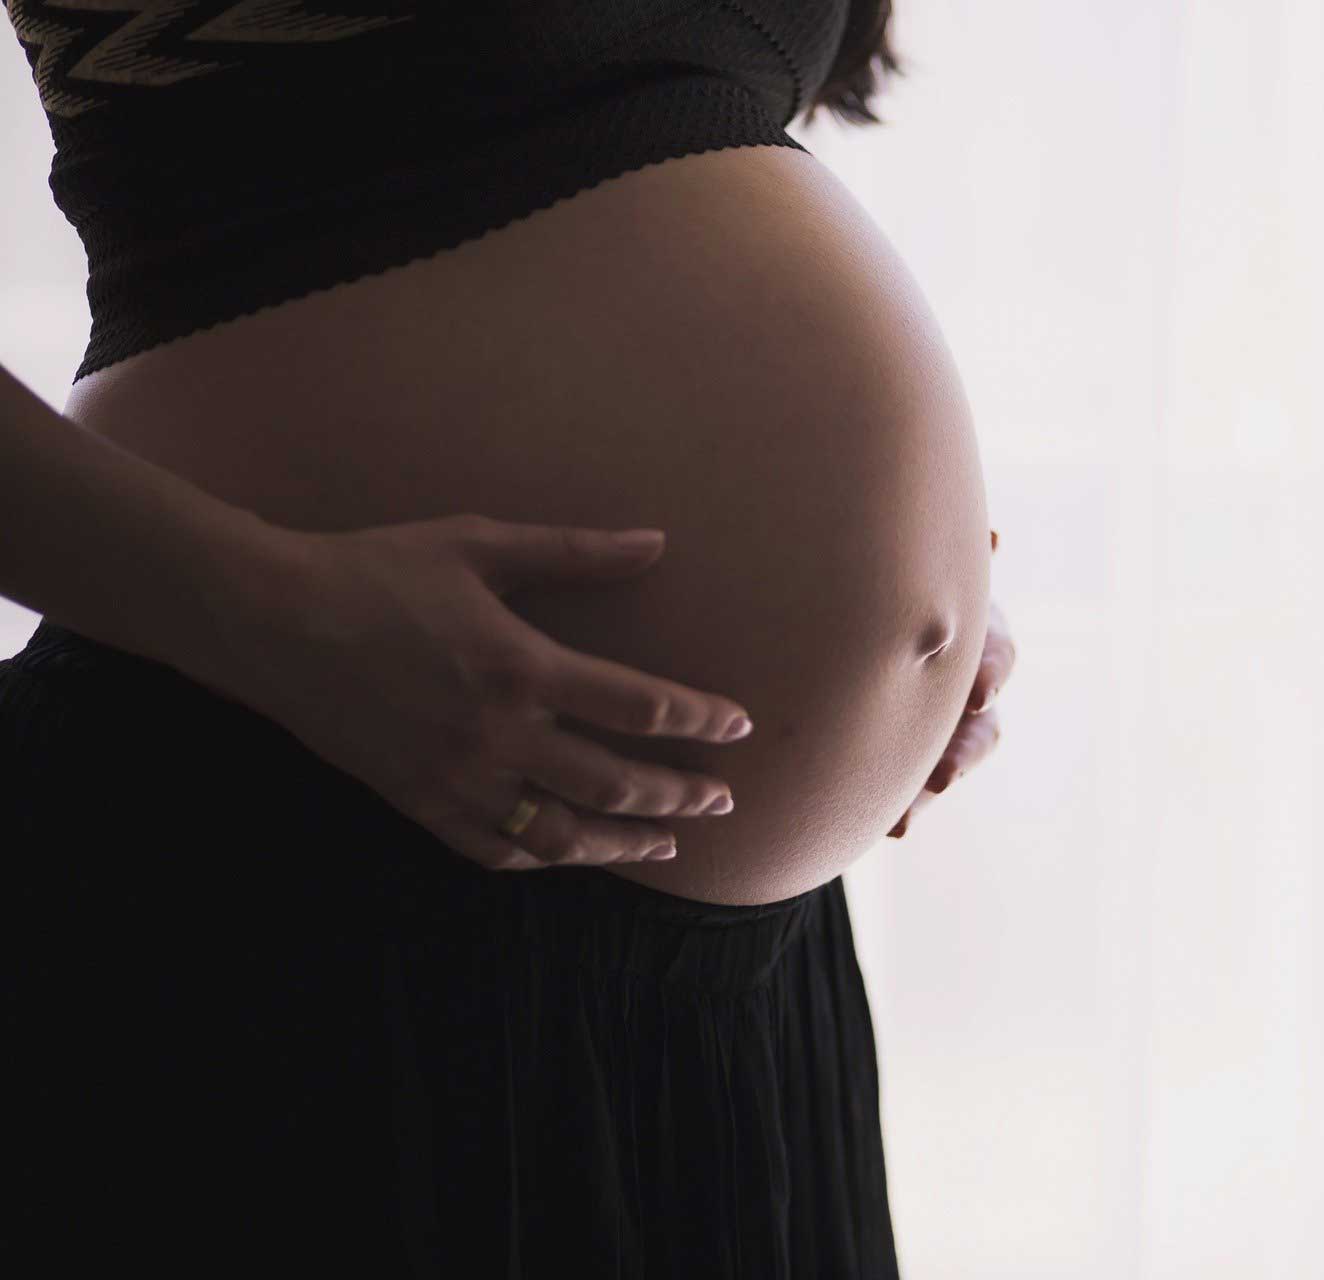 At Noosa Body Mechanics, we can support you during pregnancy and preparing for birth, as well as providing unique solutions for women who may be experiencing difficulty in becoming pregnant